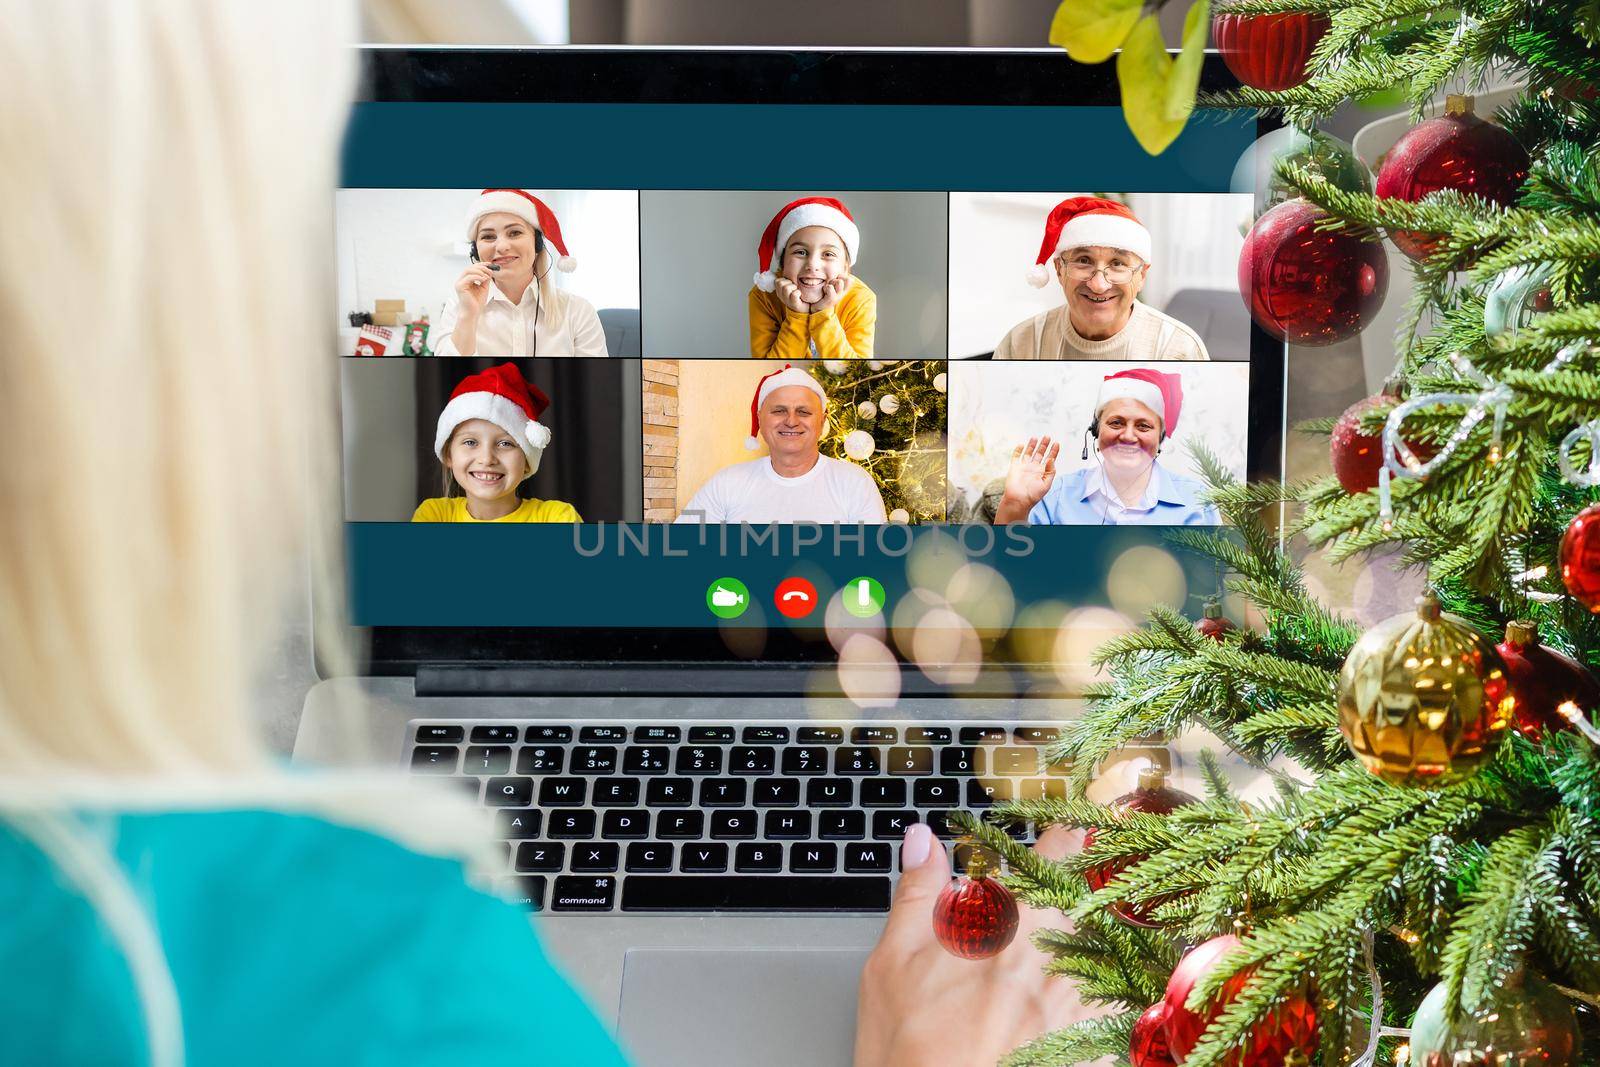 woman hands with computer, video call at christmas by Andelov13